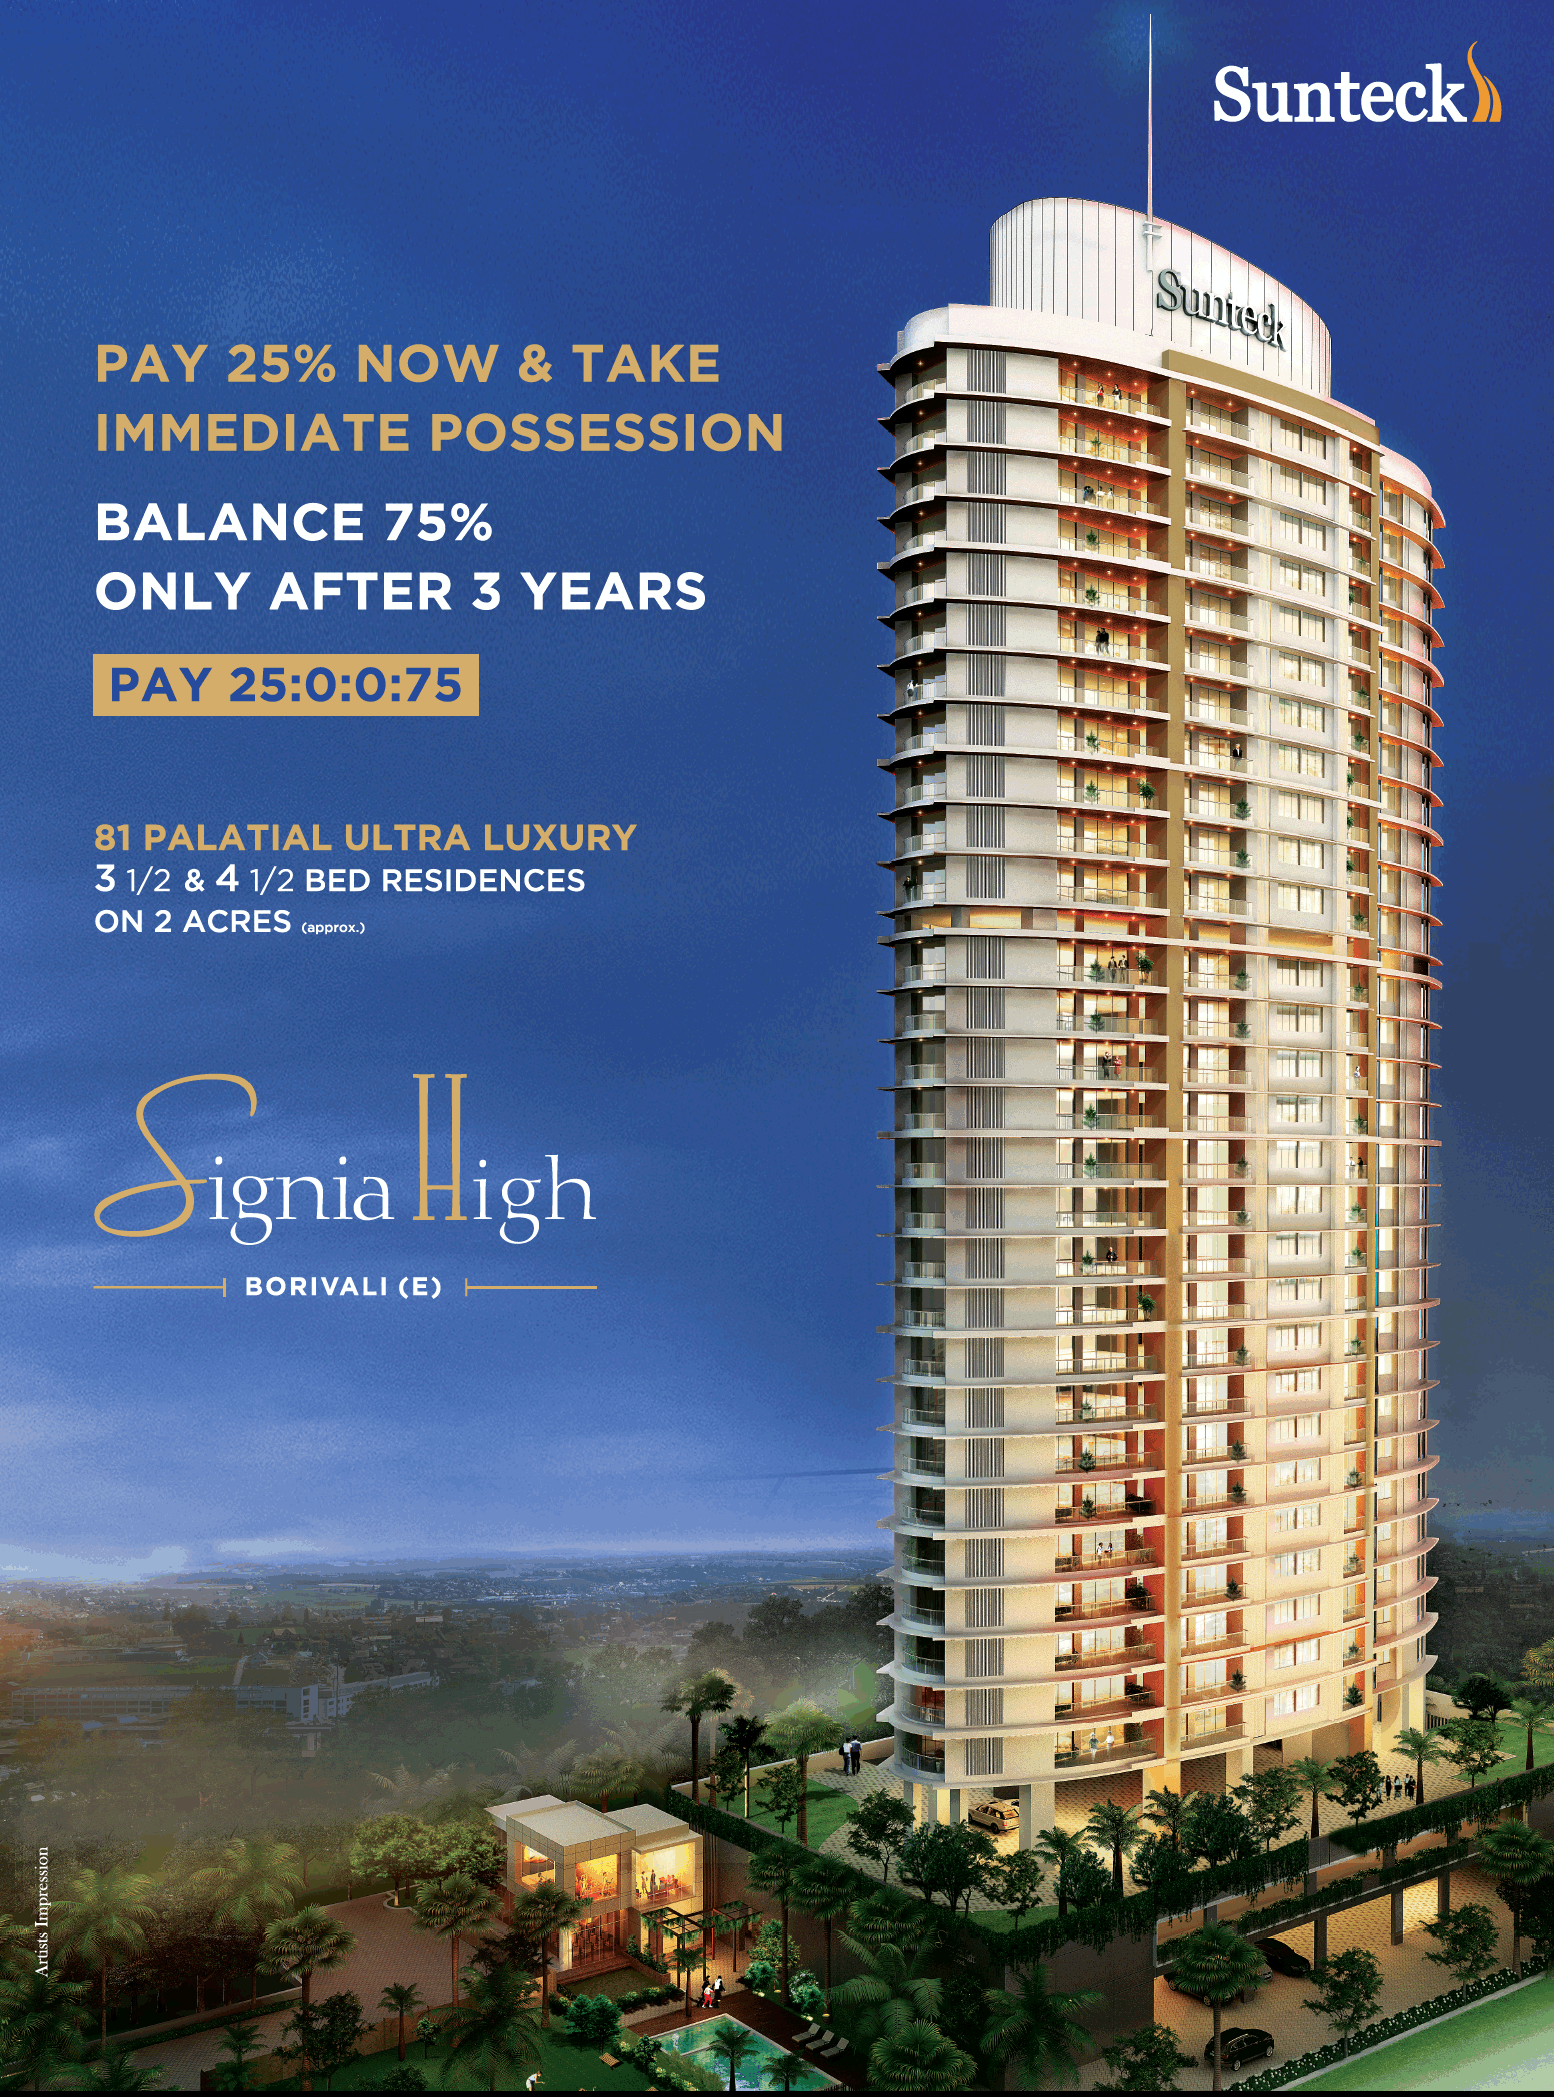 Pay 25% now & take immediate possession at Suntech Signia High in Mumbai Update